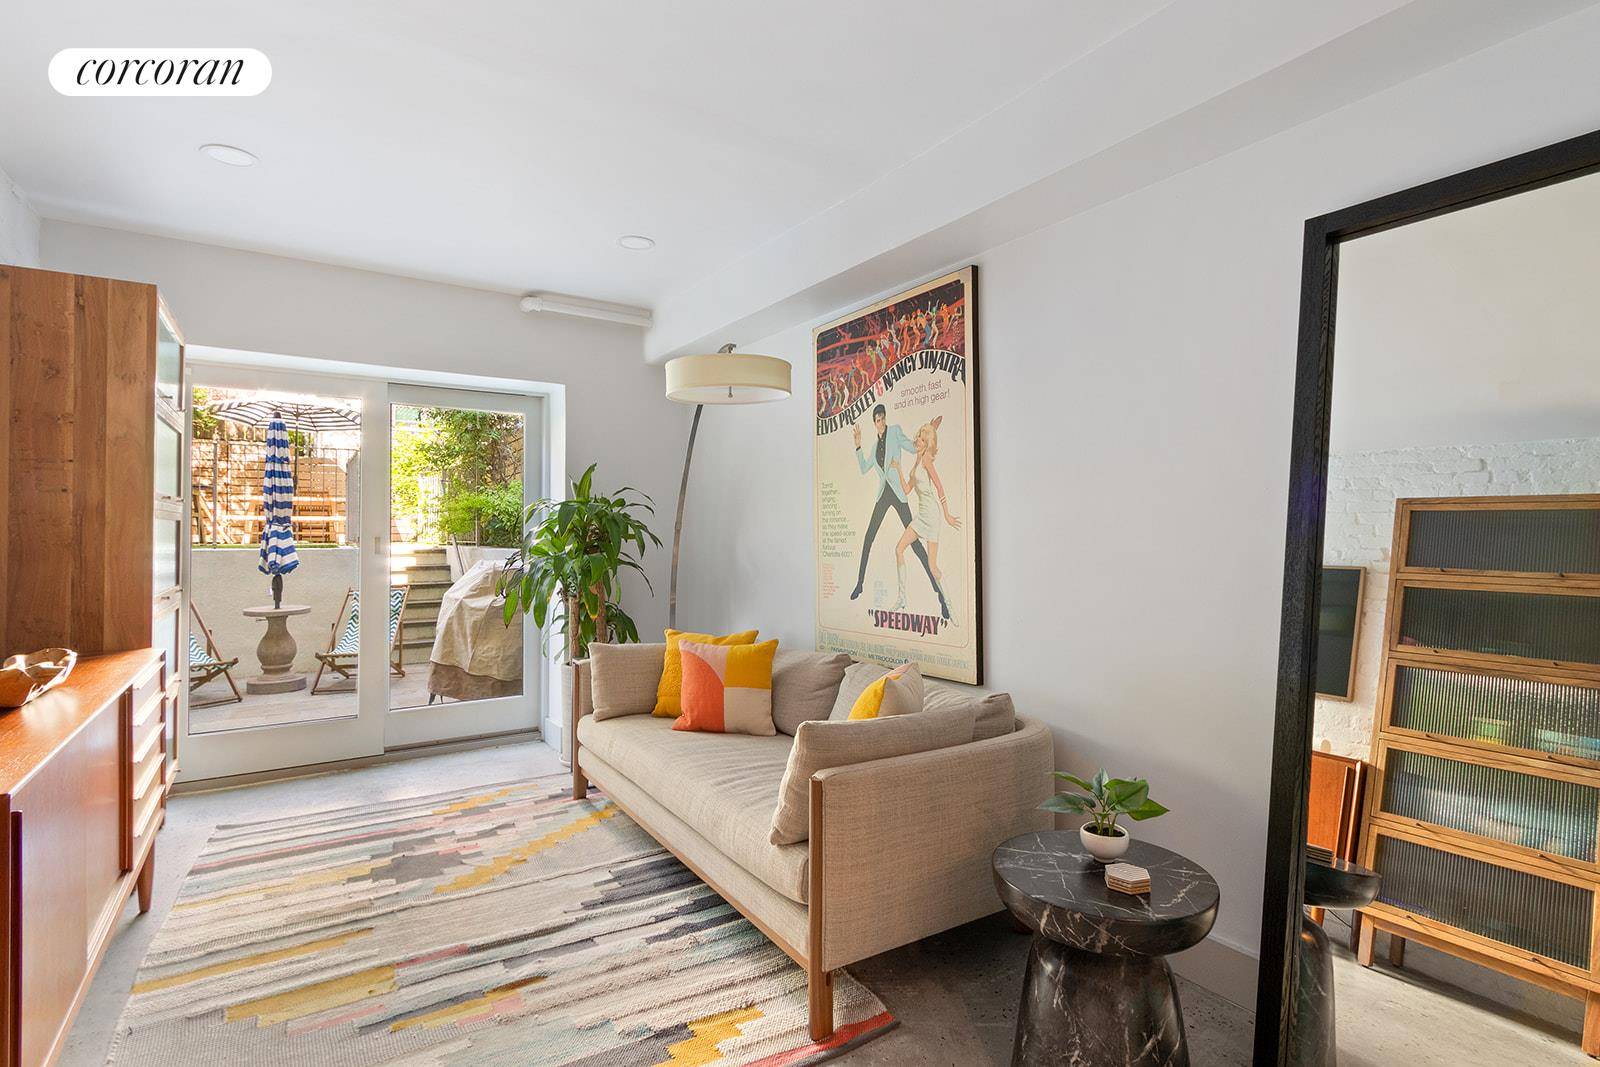 The best of Brooklyn living is yours in this stunning duplex apartment in prime Park Slope, mere moments from Prospect Park's Long Meadow and all the amenities of 5th Ave, ...